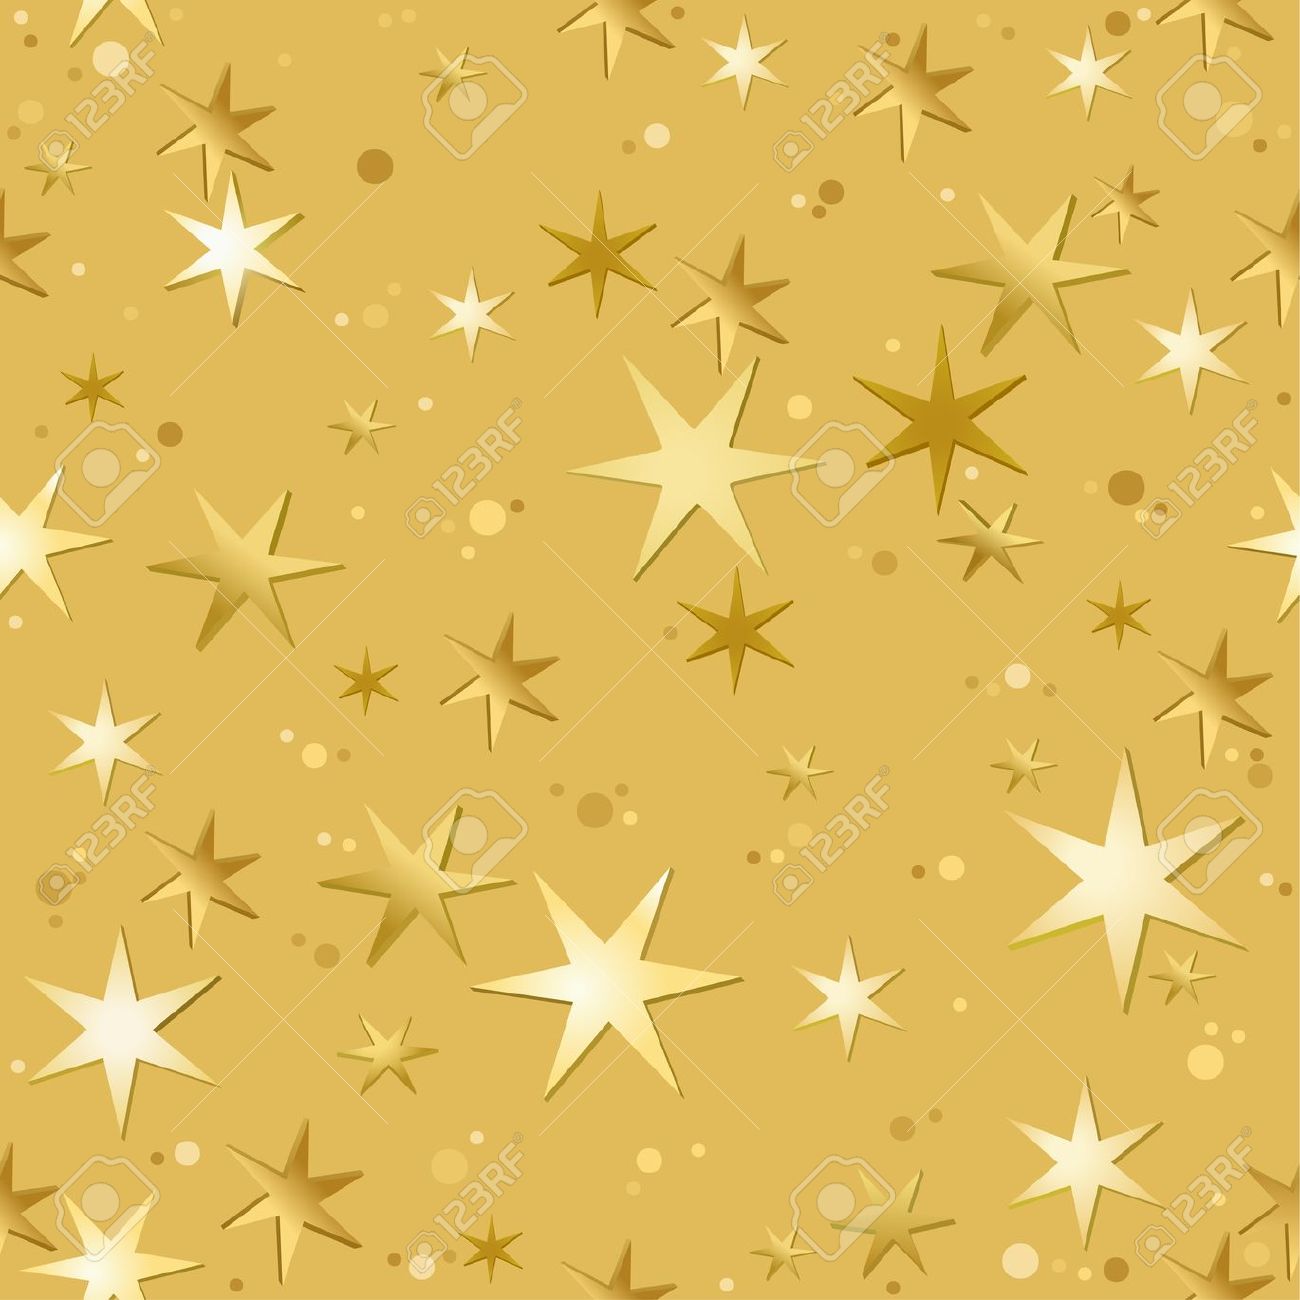 Free star background clipart 